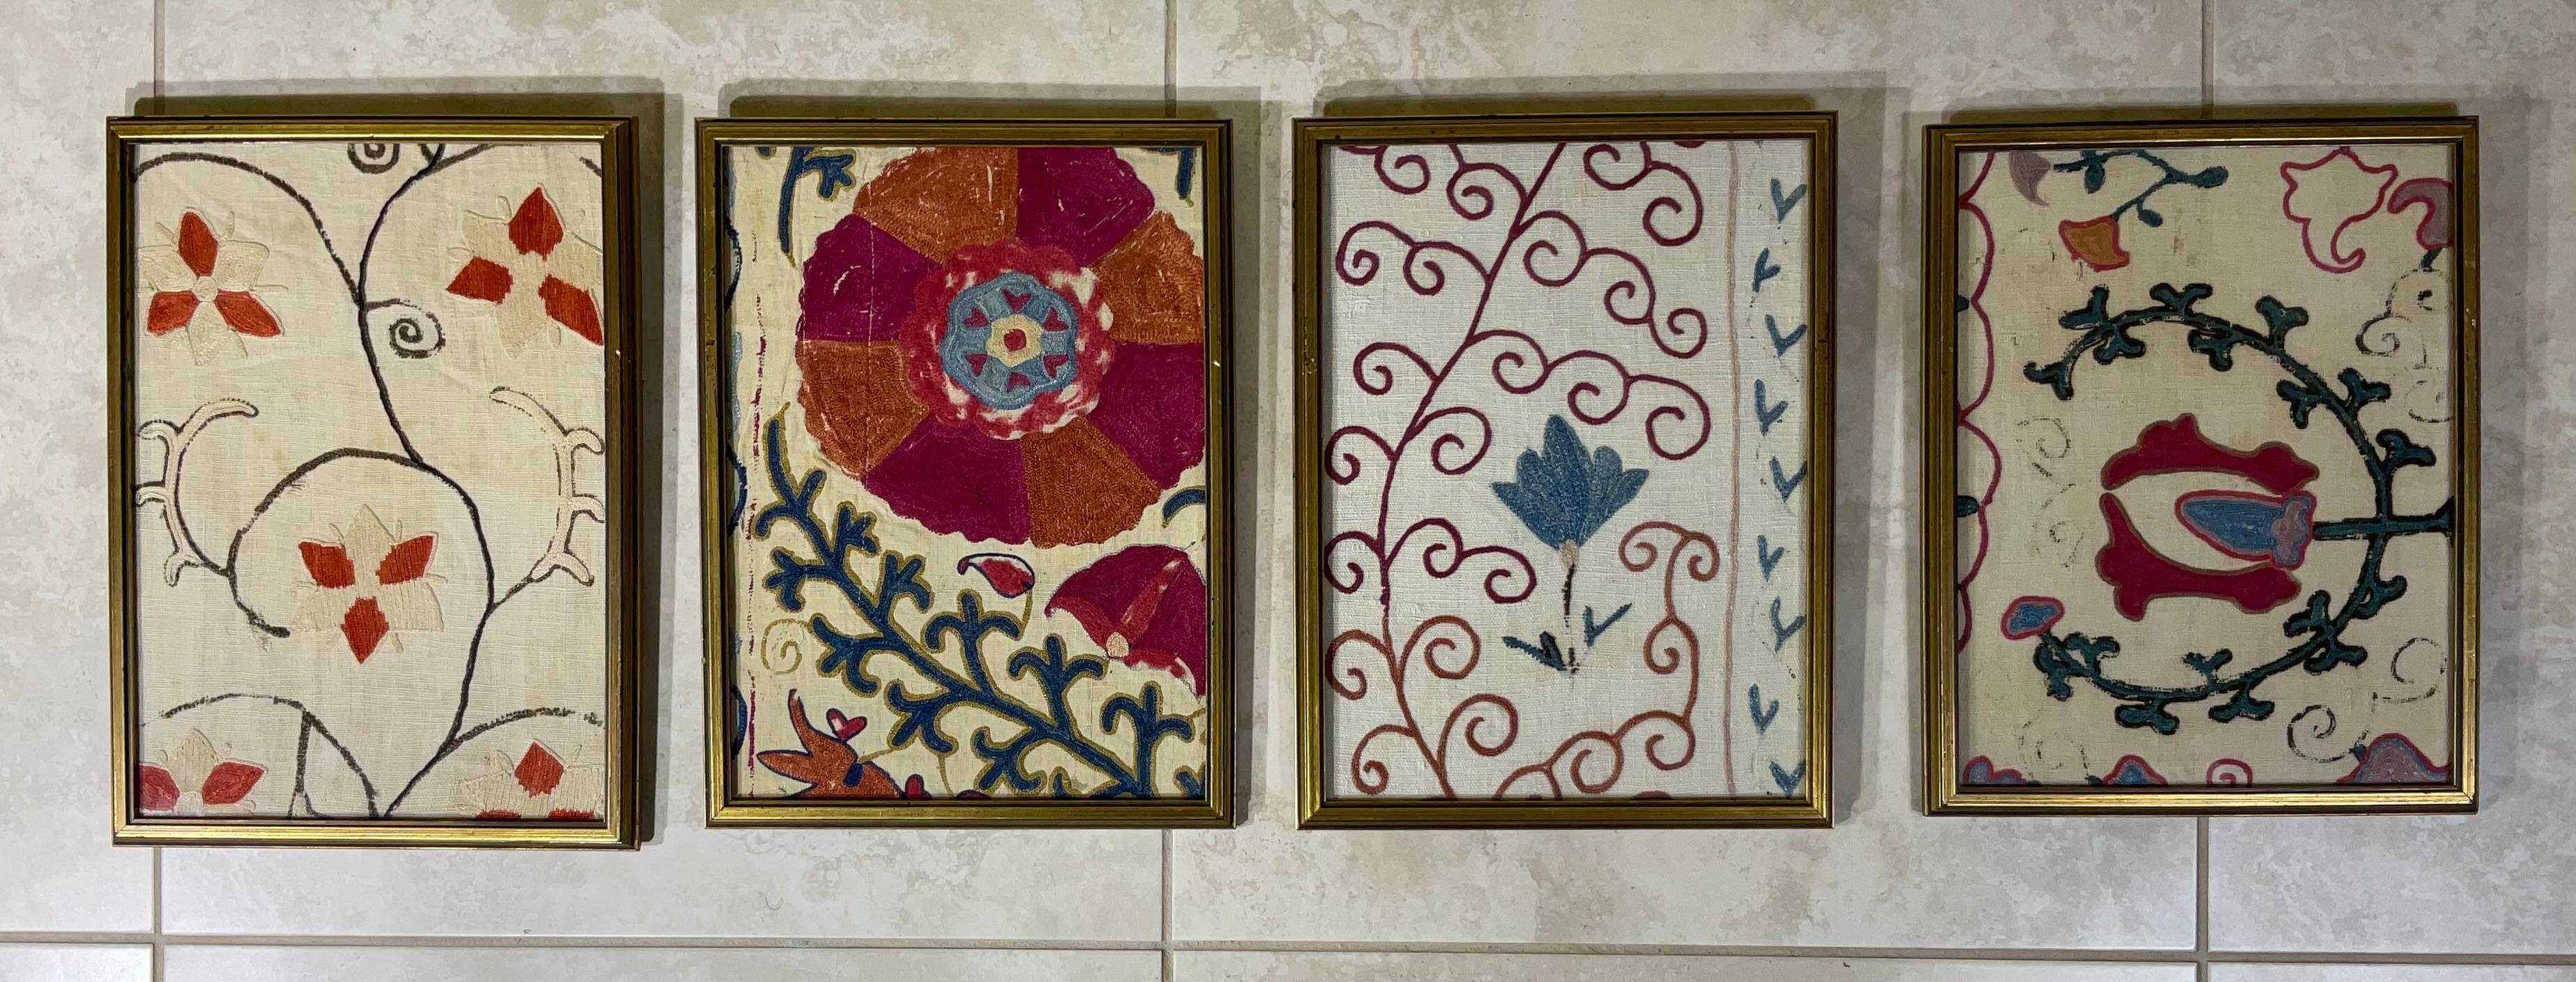 Exceptional antique hand embroidery fragments of Suzani textile, professionally mounted on four solid  wood frame to make beautiful versatile objects of art for wall hanging.
Even though these hand made fragments are almost century old we can still